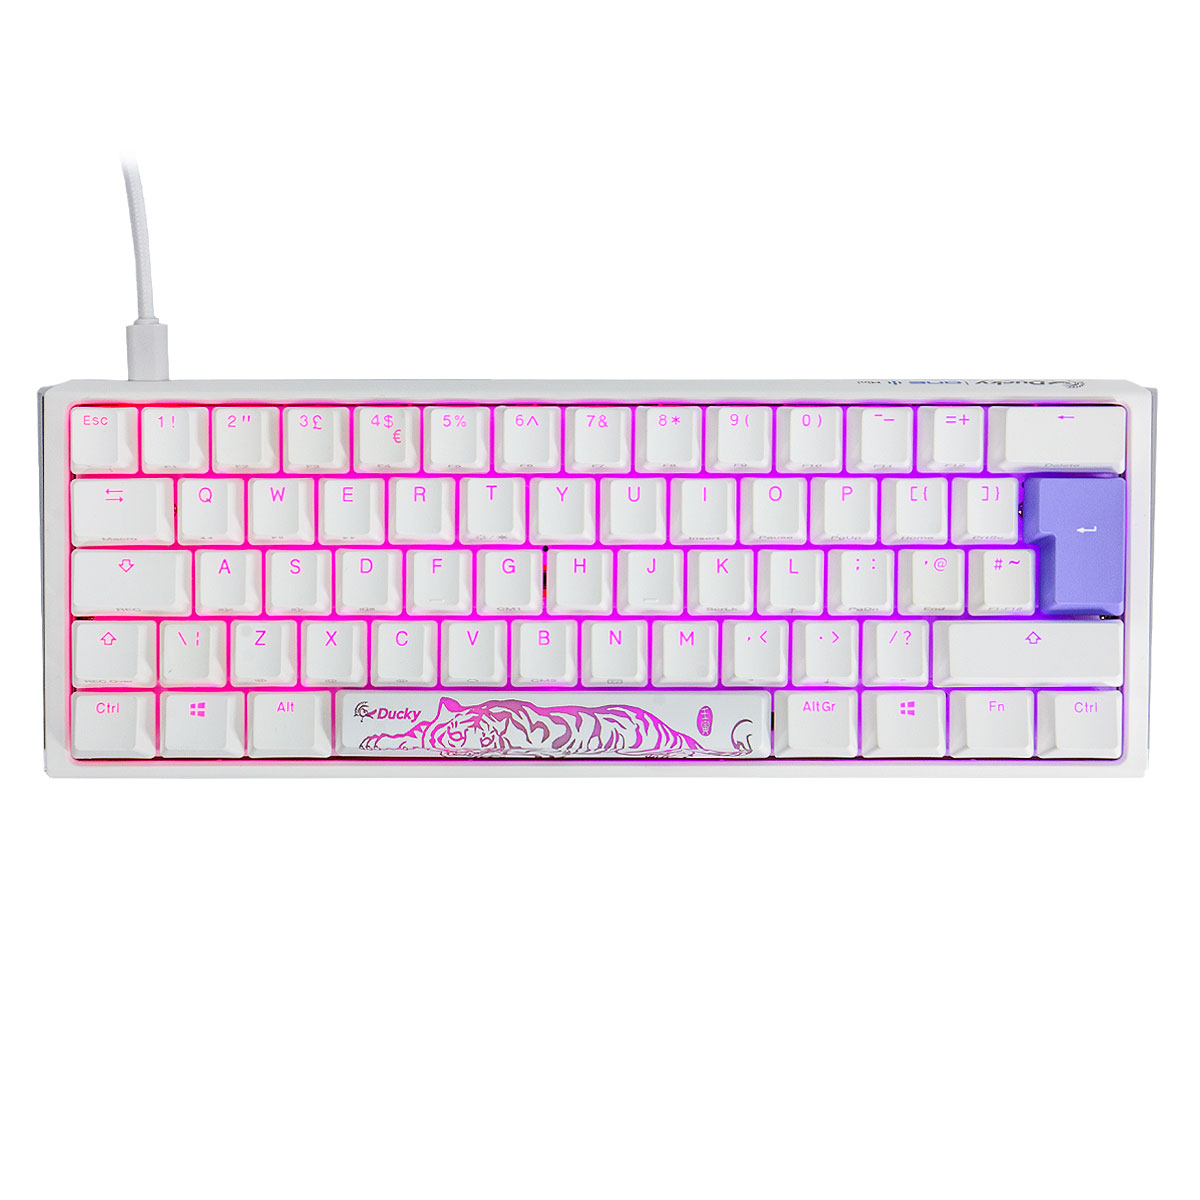 Ducky One 3 Classic 60 USB RGB Mechanical Gaming Keyboard Cherry Silent Red - Pure White UK Layout